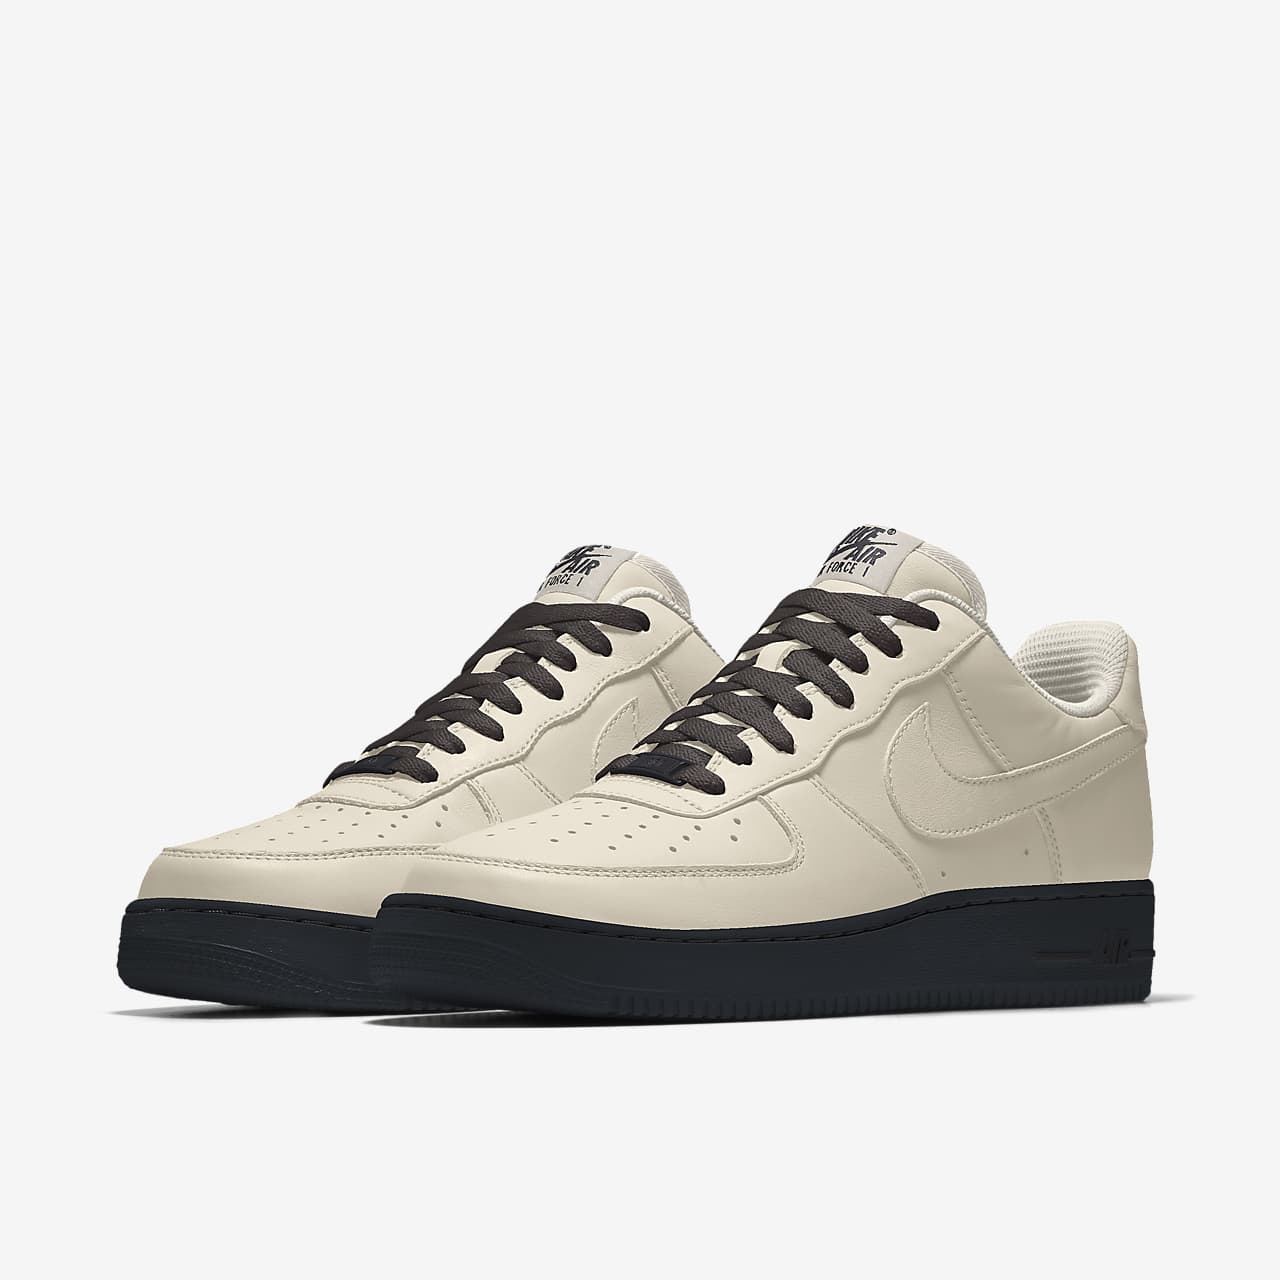 Scarpa personalizzabile Nike Air Force 1 Low By You - Uomo